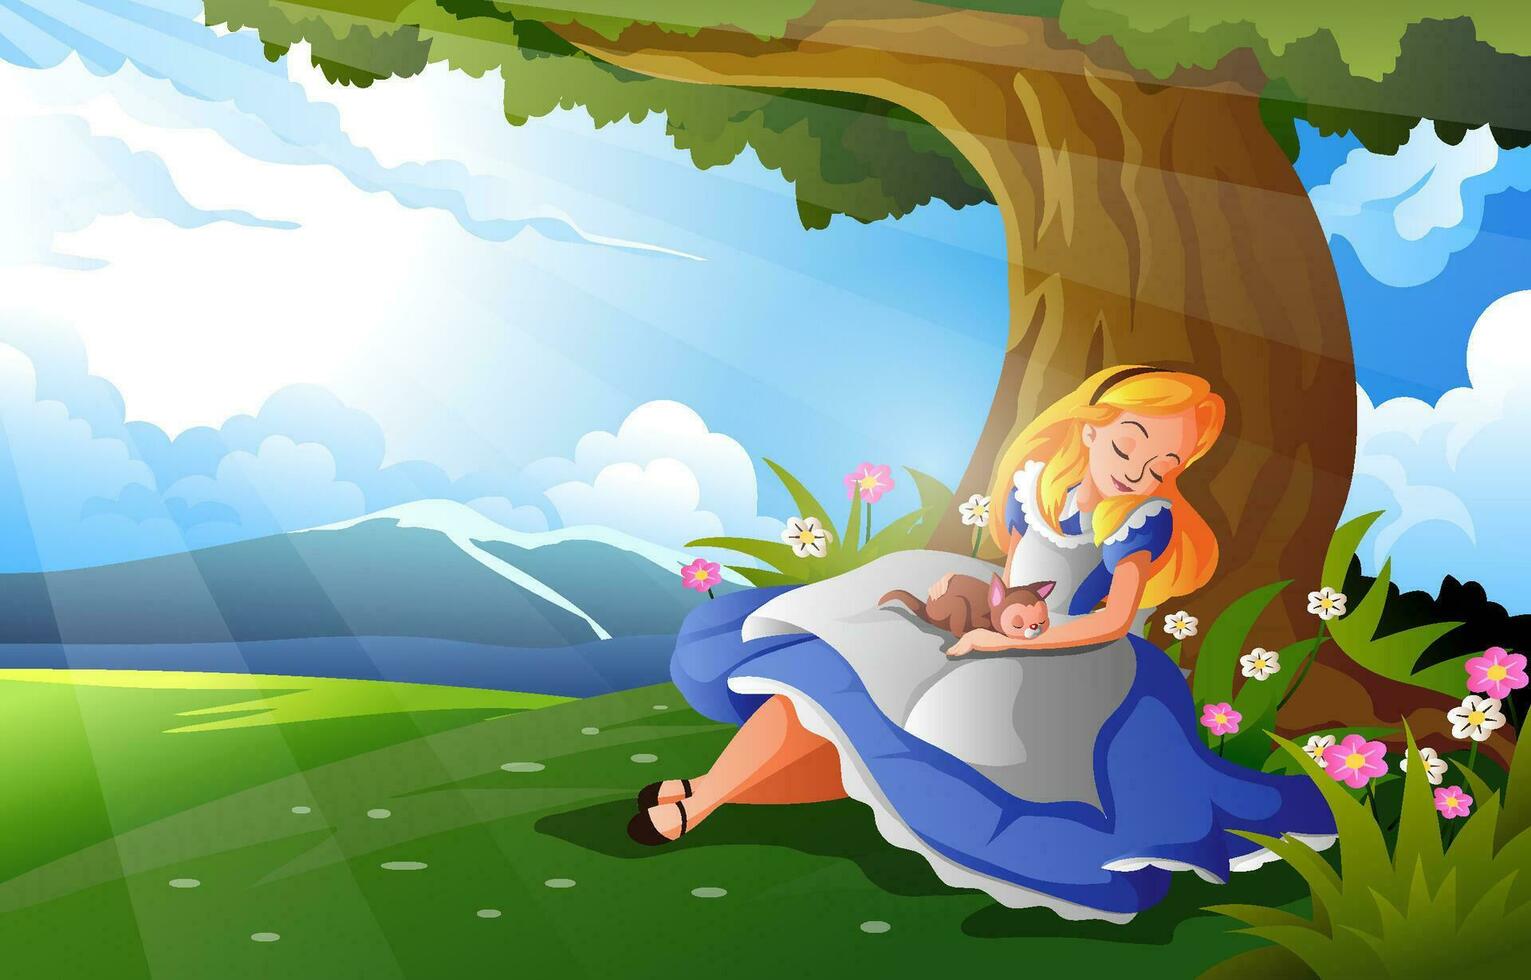 Sleeping Girl by The Tree Background vector